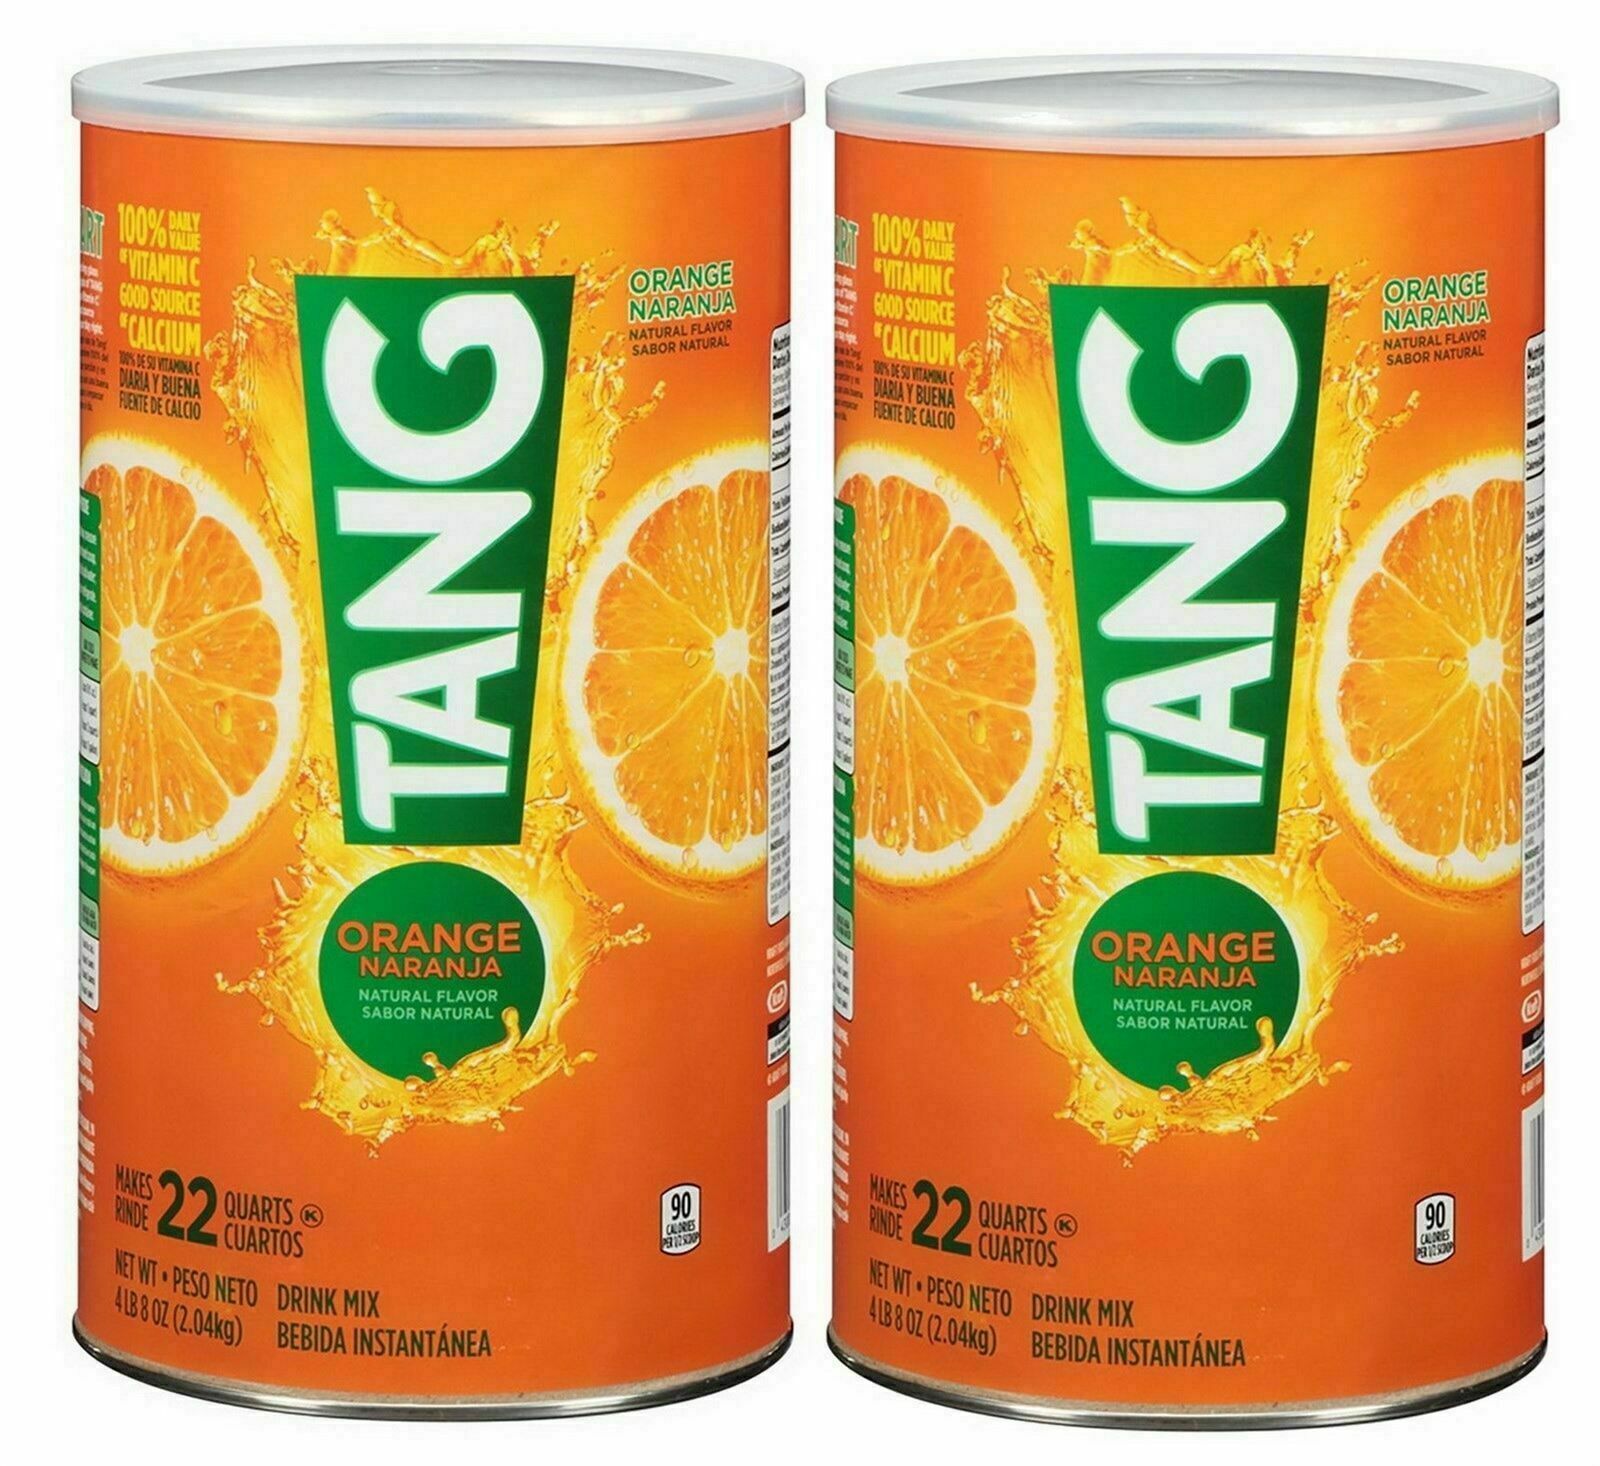 Tang Orange Drink Mix, 72oz Cannister 2 Pk (makes 44 Qts.)